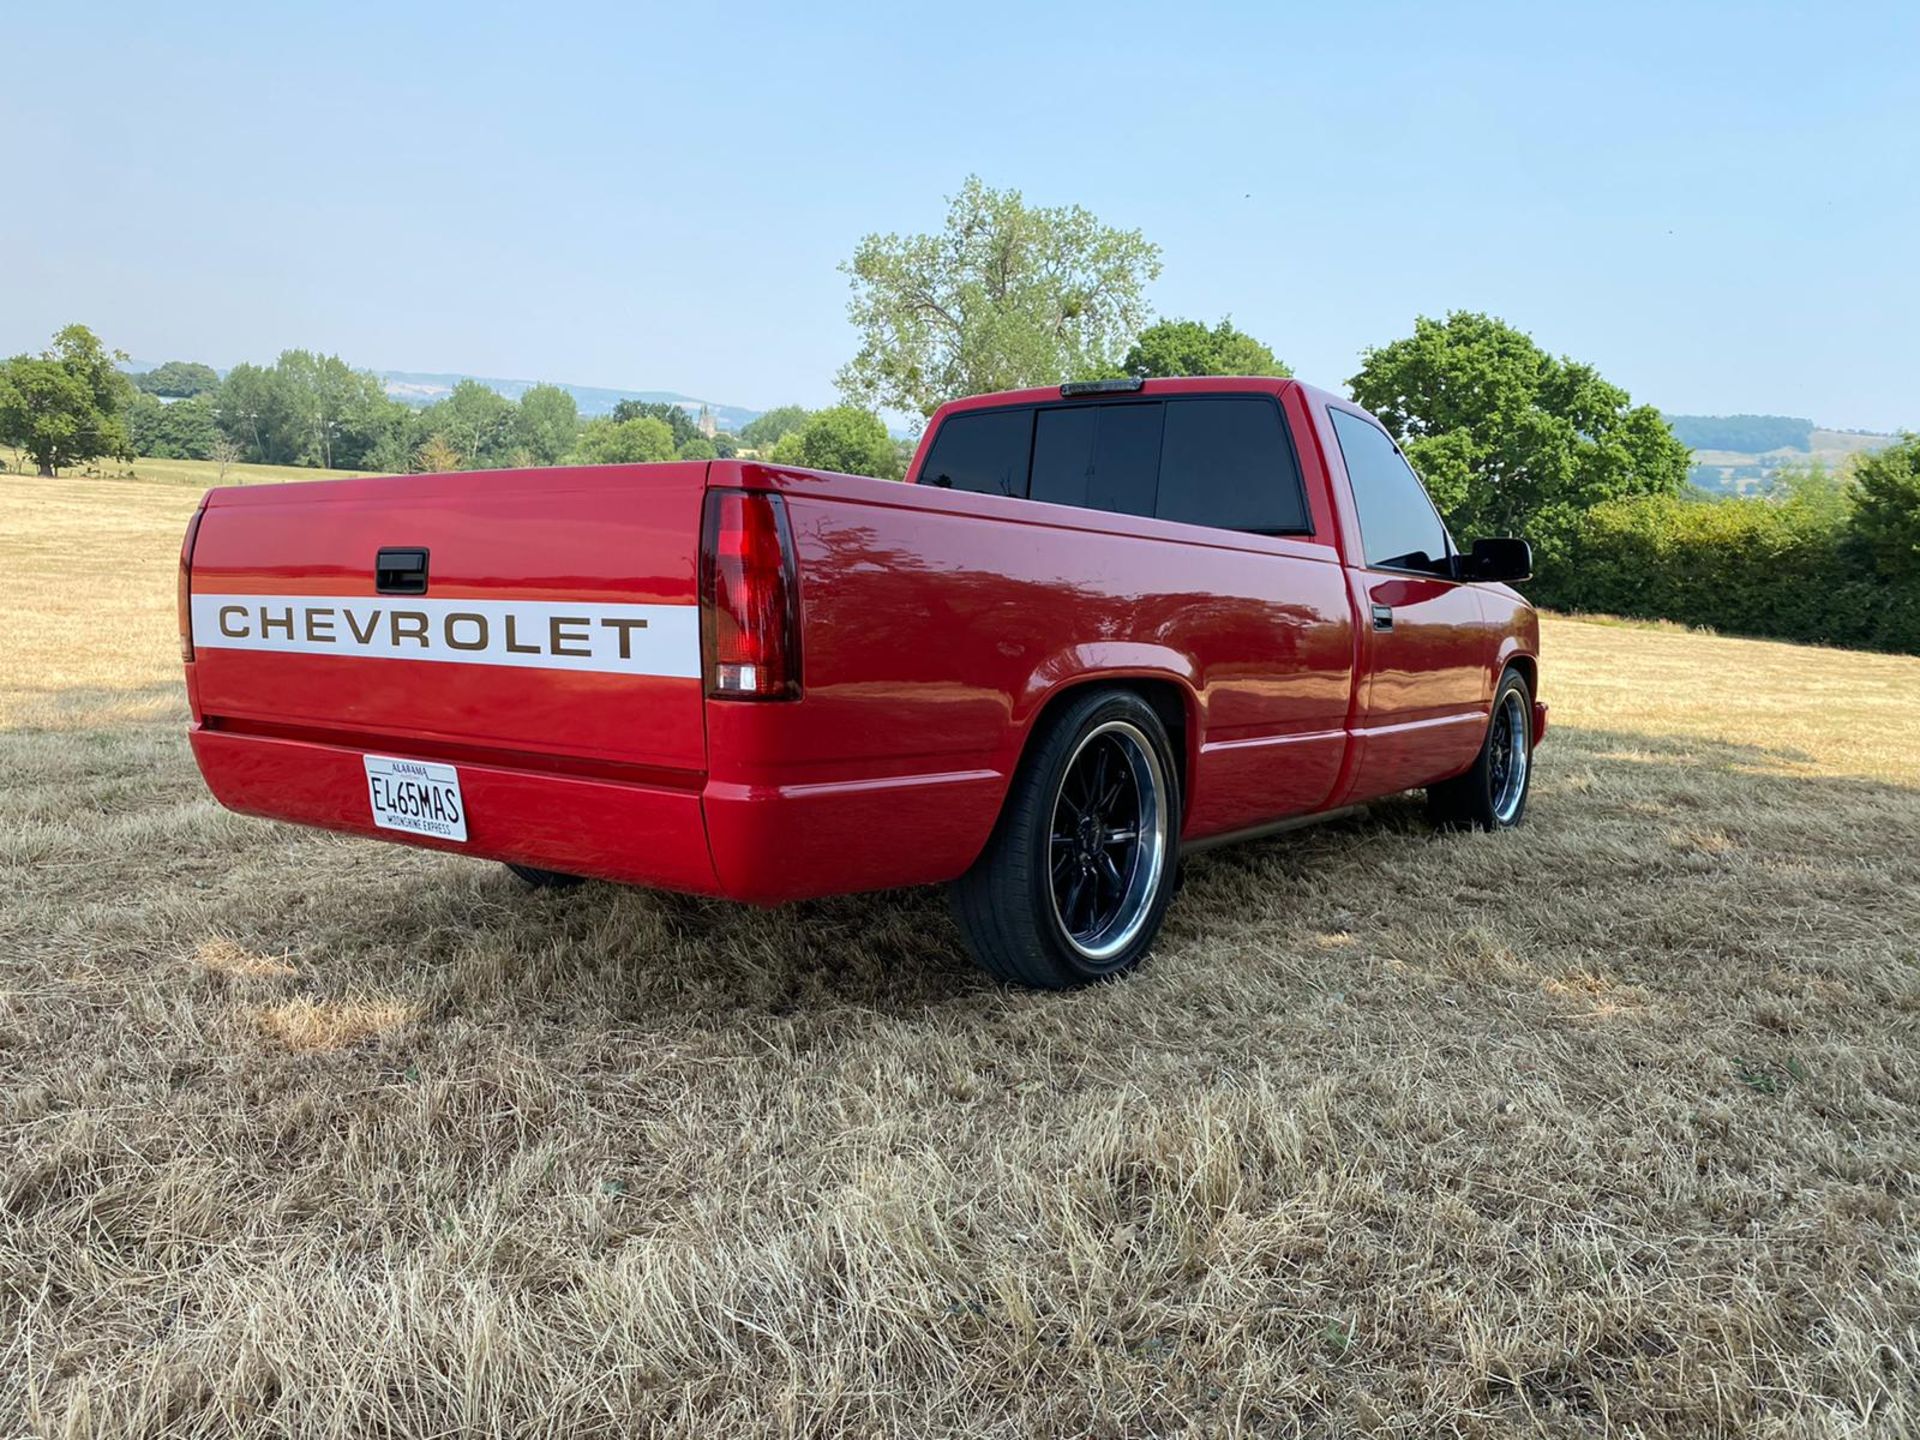 Super Red 1988 Chevrolet C1500 / OBS / GMT-400 - Single cab long bed (8ft) - Image 6 of 15